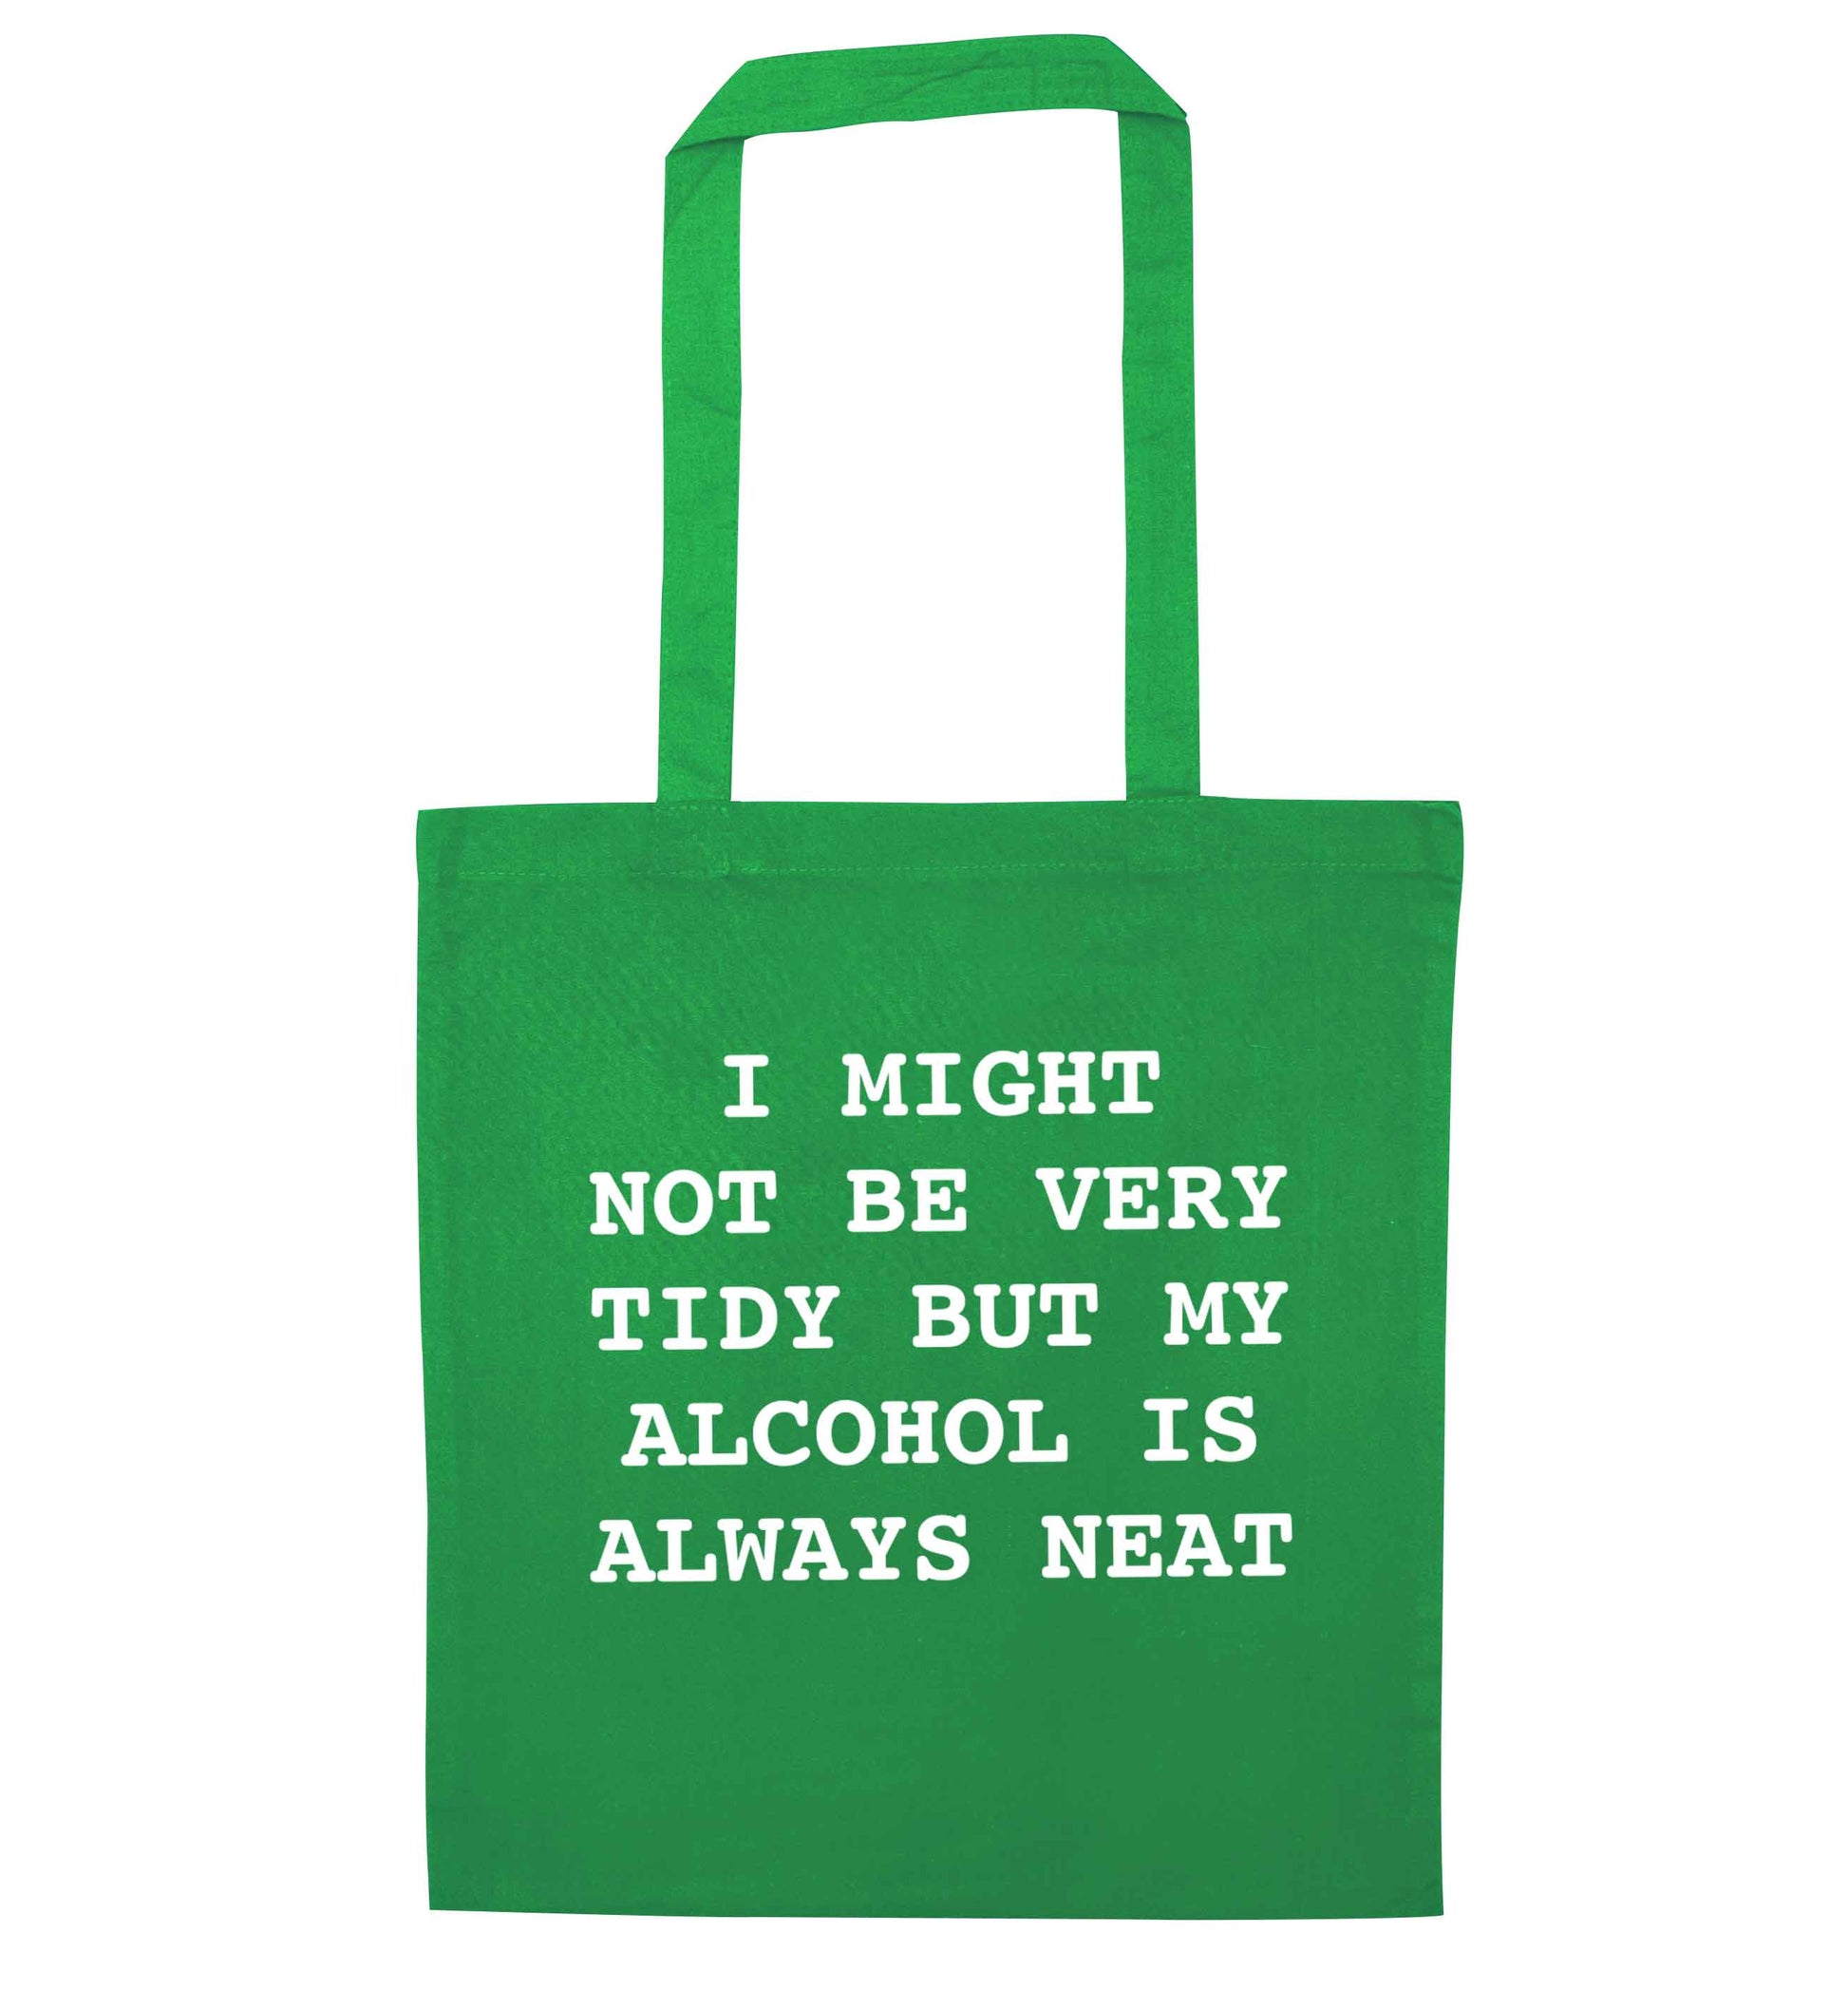 I might not be tidy but my alcohol is always neat green tote bag